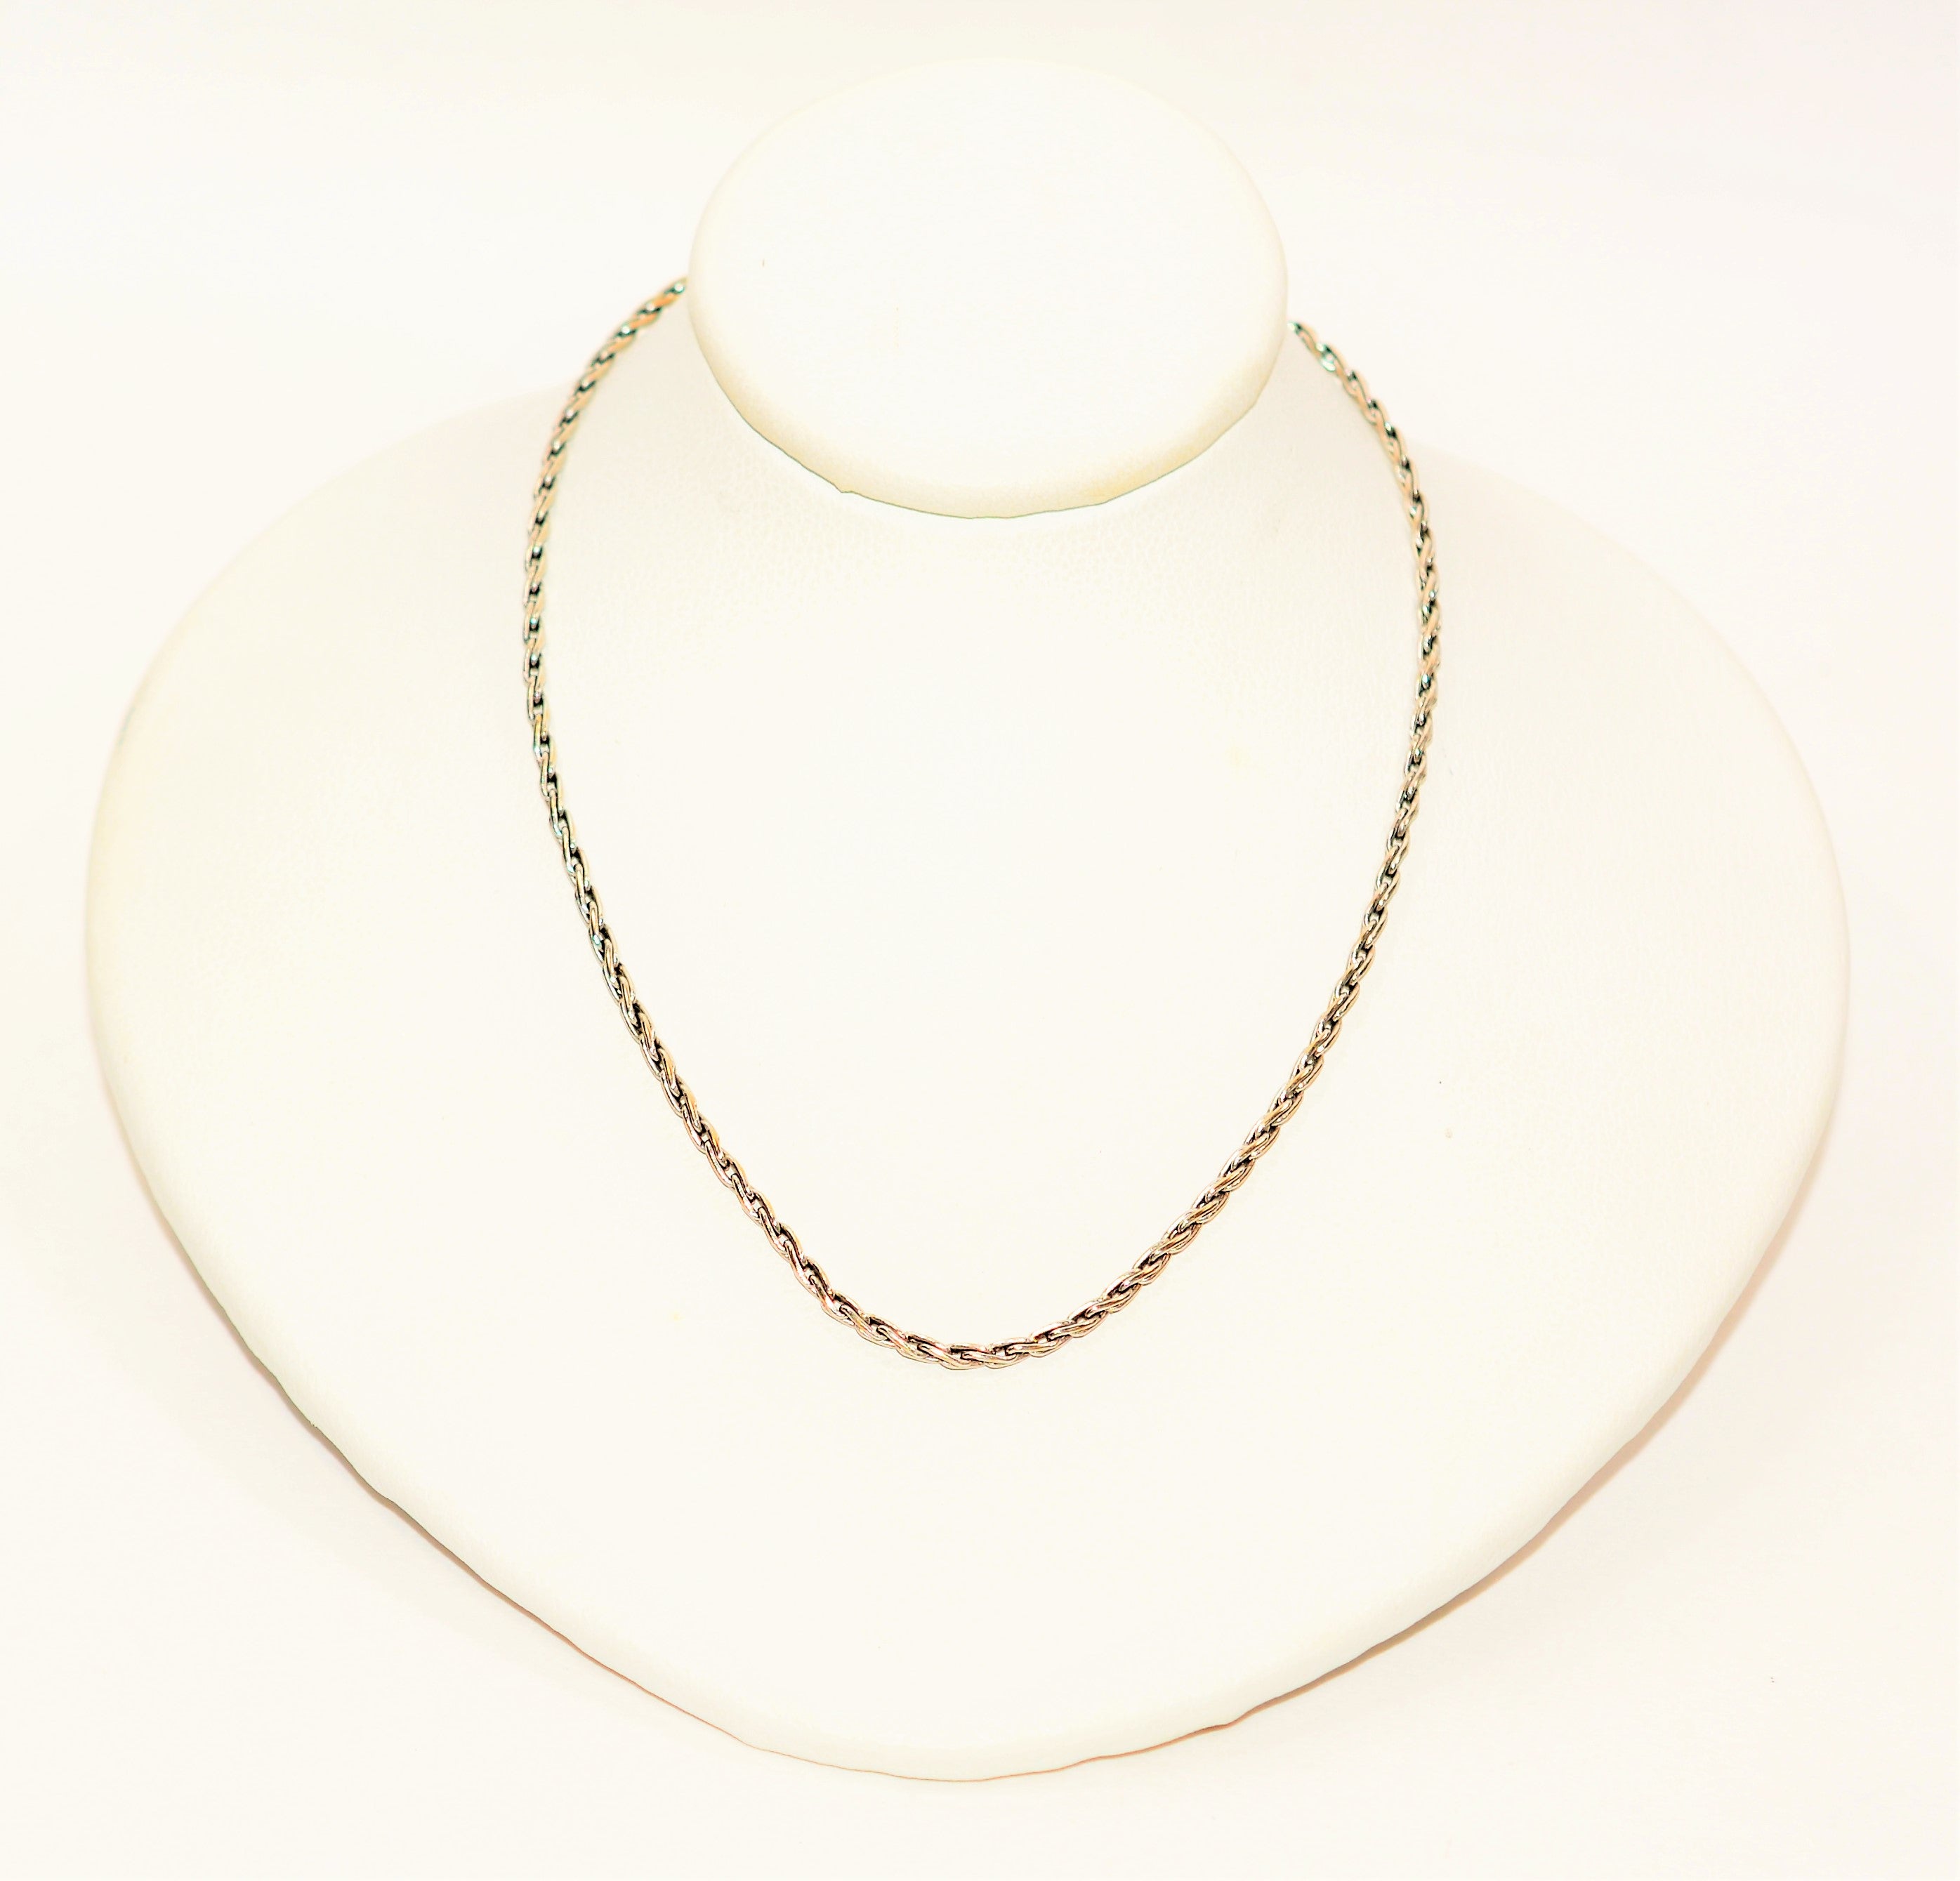 14K Solid White Gold Braided Wheat Chain Necklace 16" 1.75mm 5.9 Grams Gold Chain Estate Necklace Gold Necklace Vintage Necklace Fine Chain